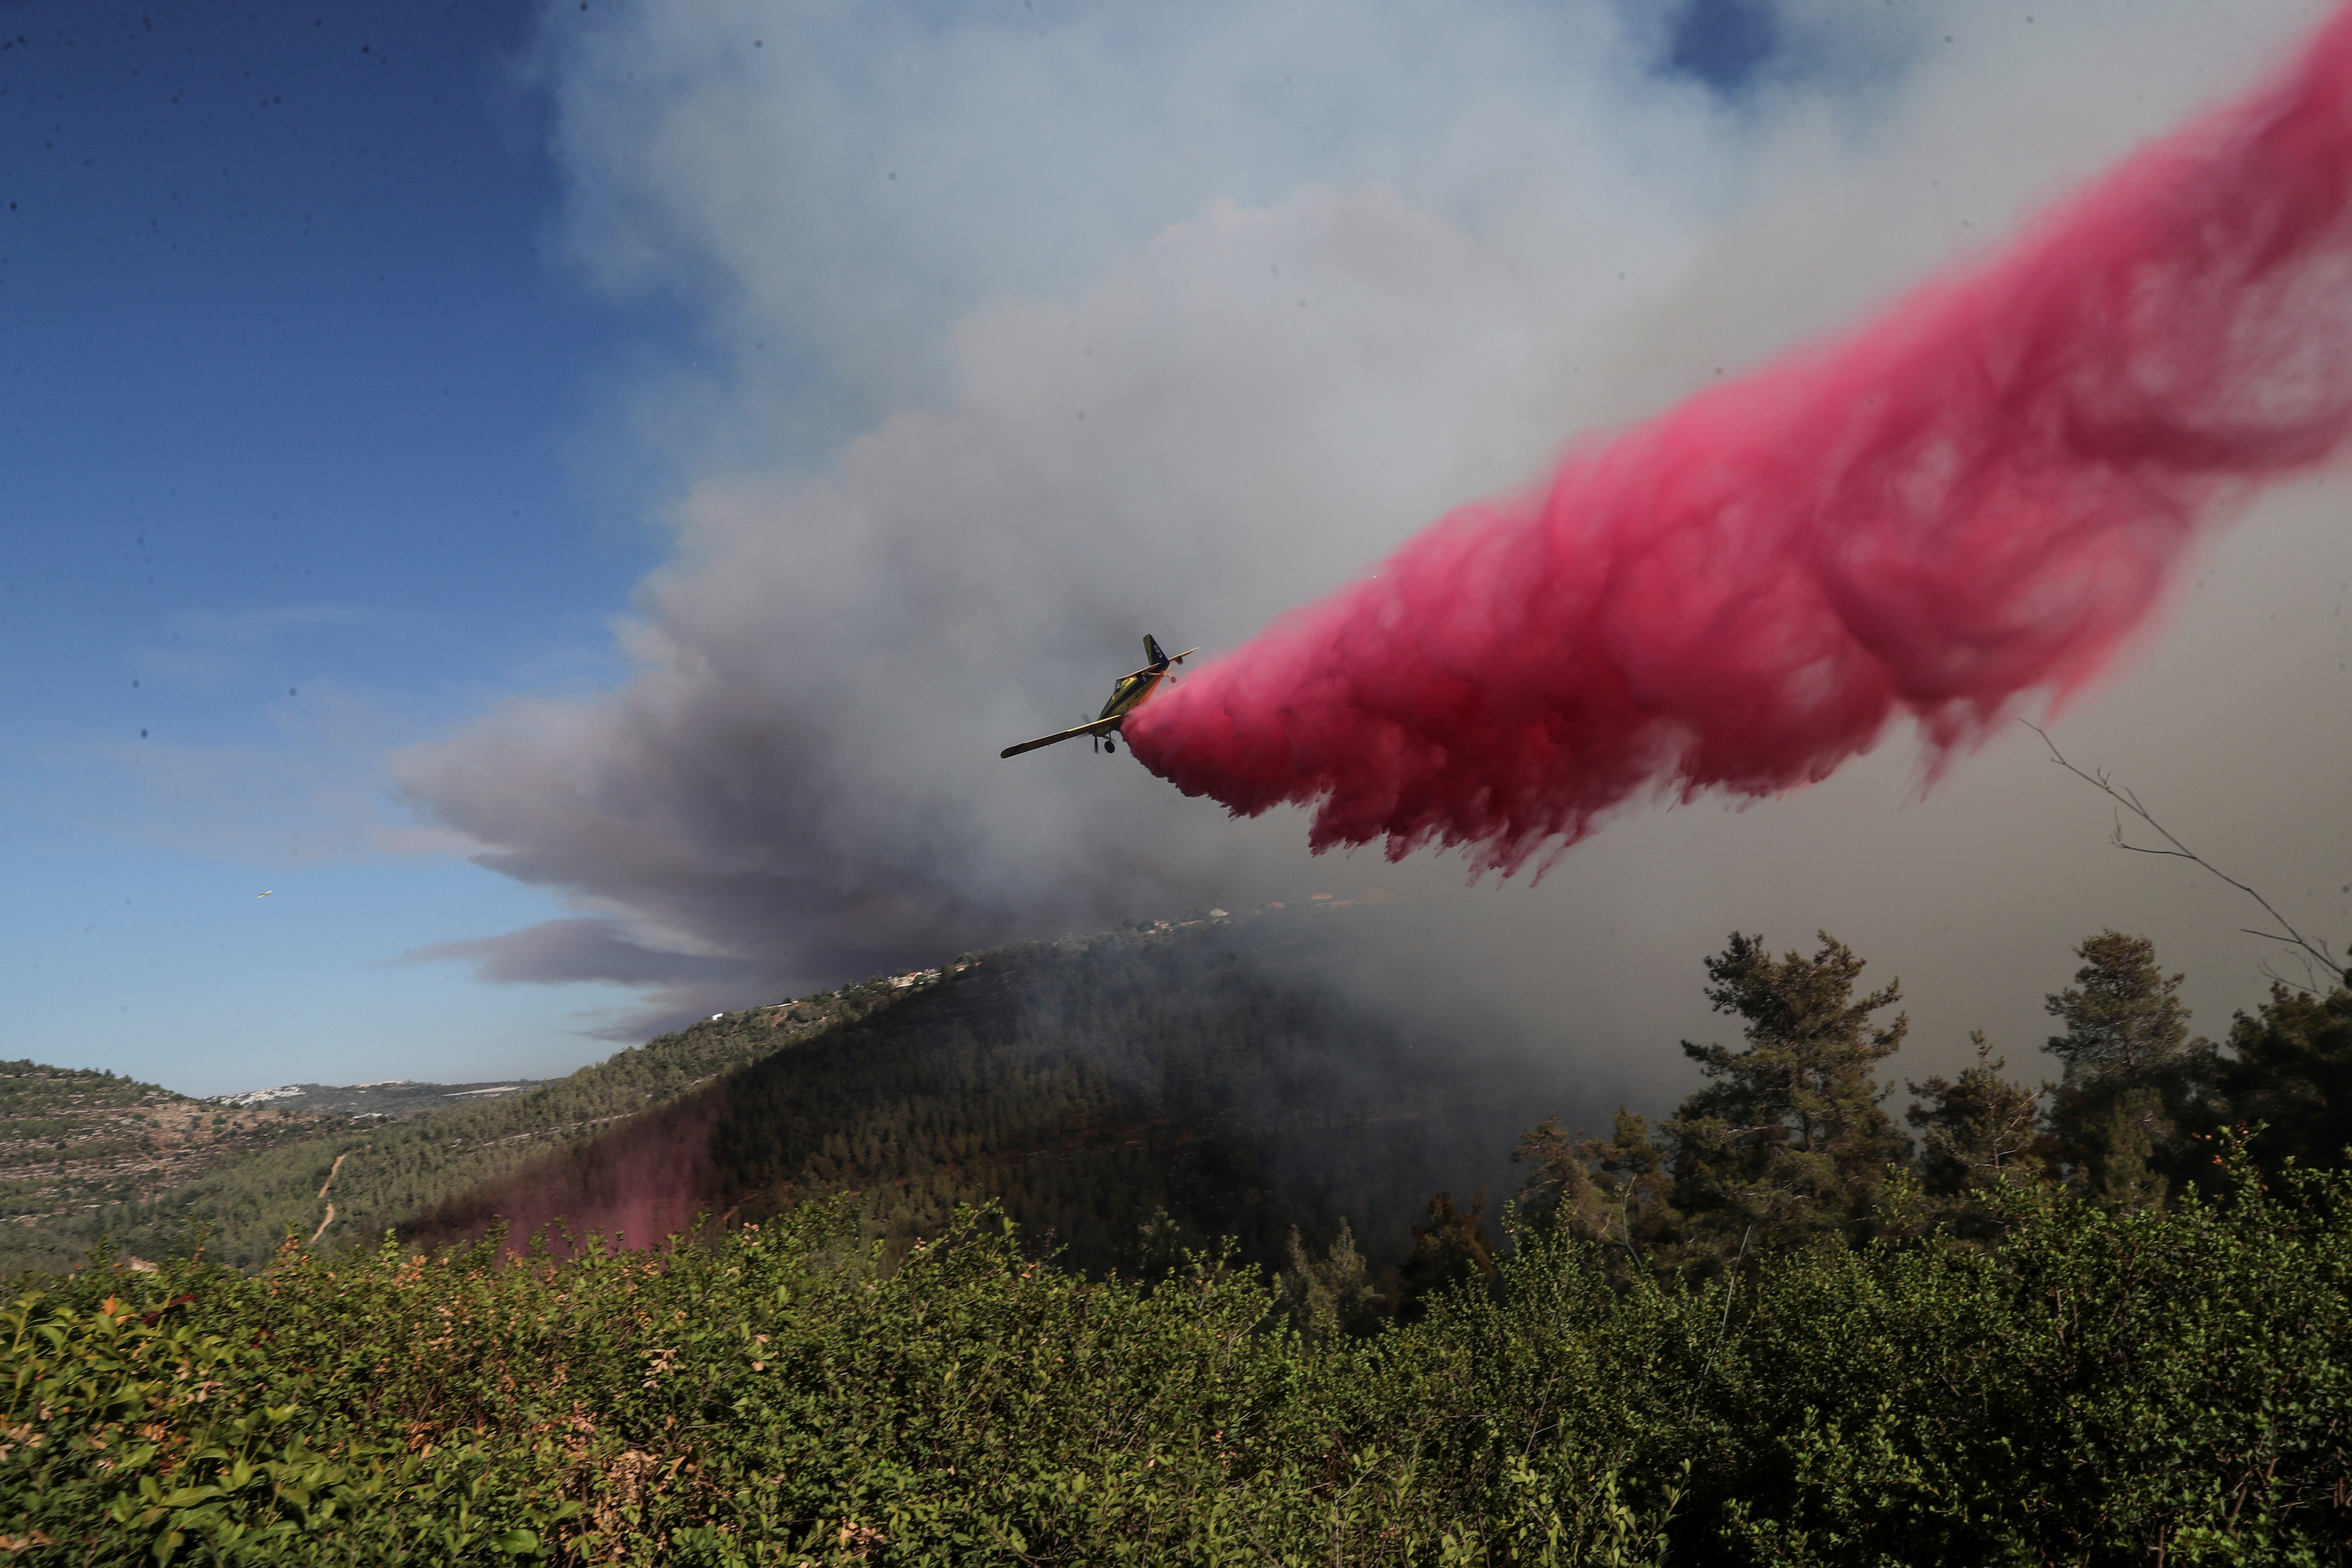 A firefighting plane disperses fire retardant as it assists in extinguishing a fire near the Israeli village of Shoresh at the outskirts of Jerusalem August 15, 2021. REUTERS/Ronen Zvulun